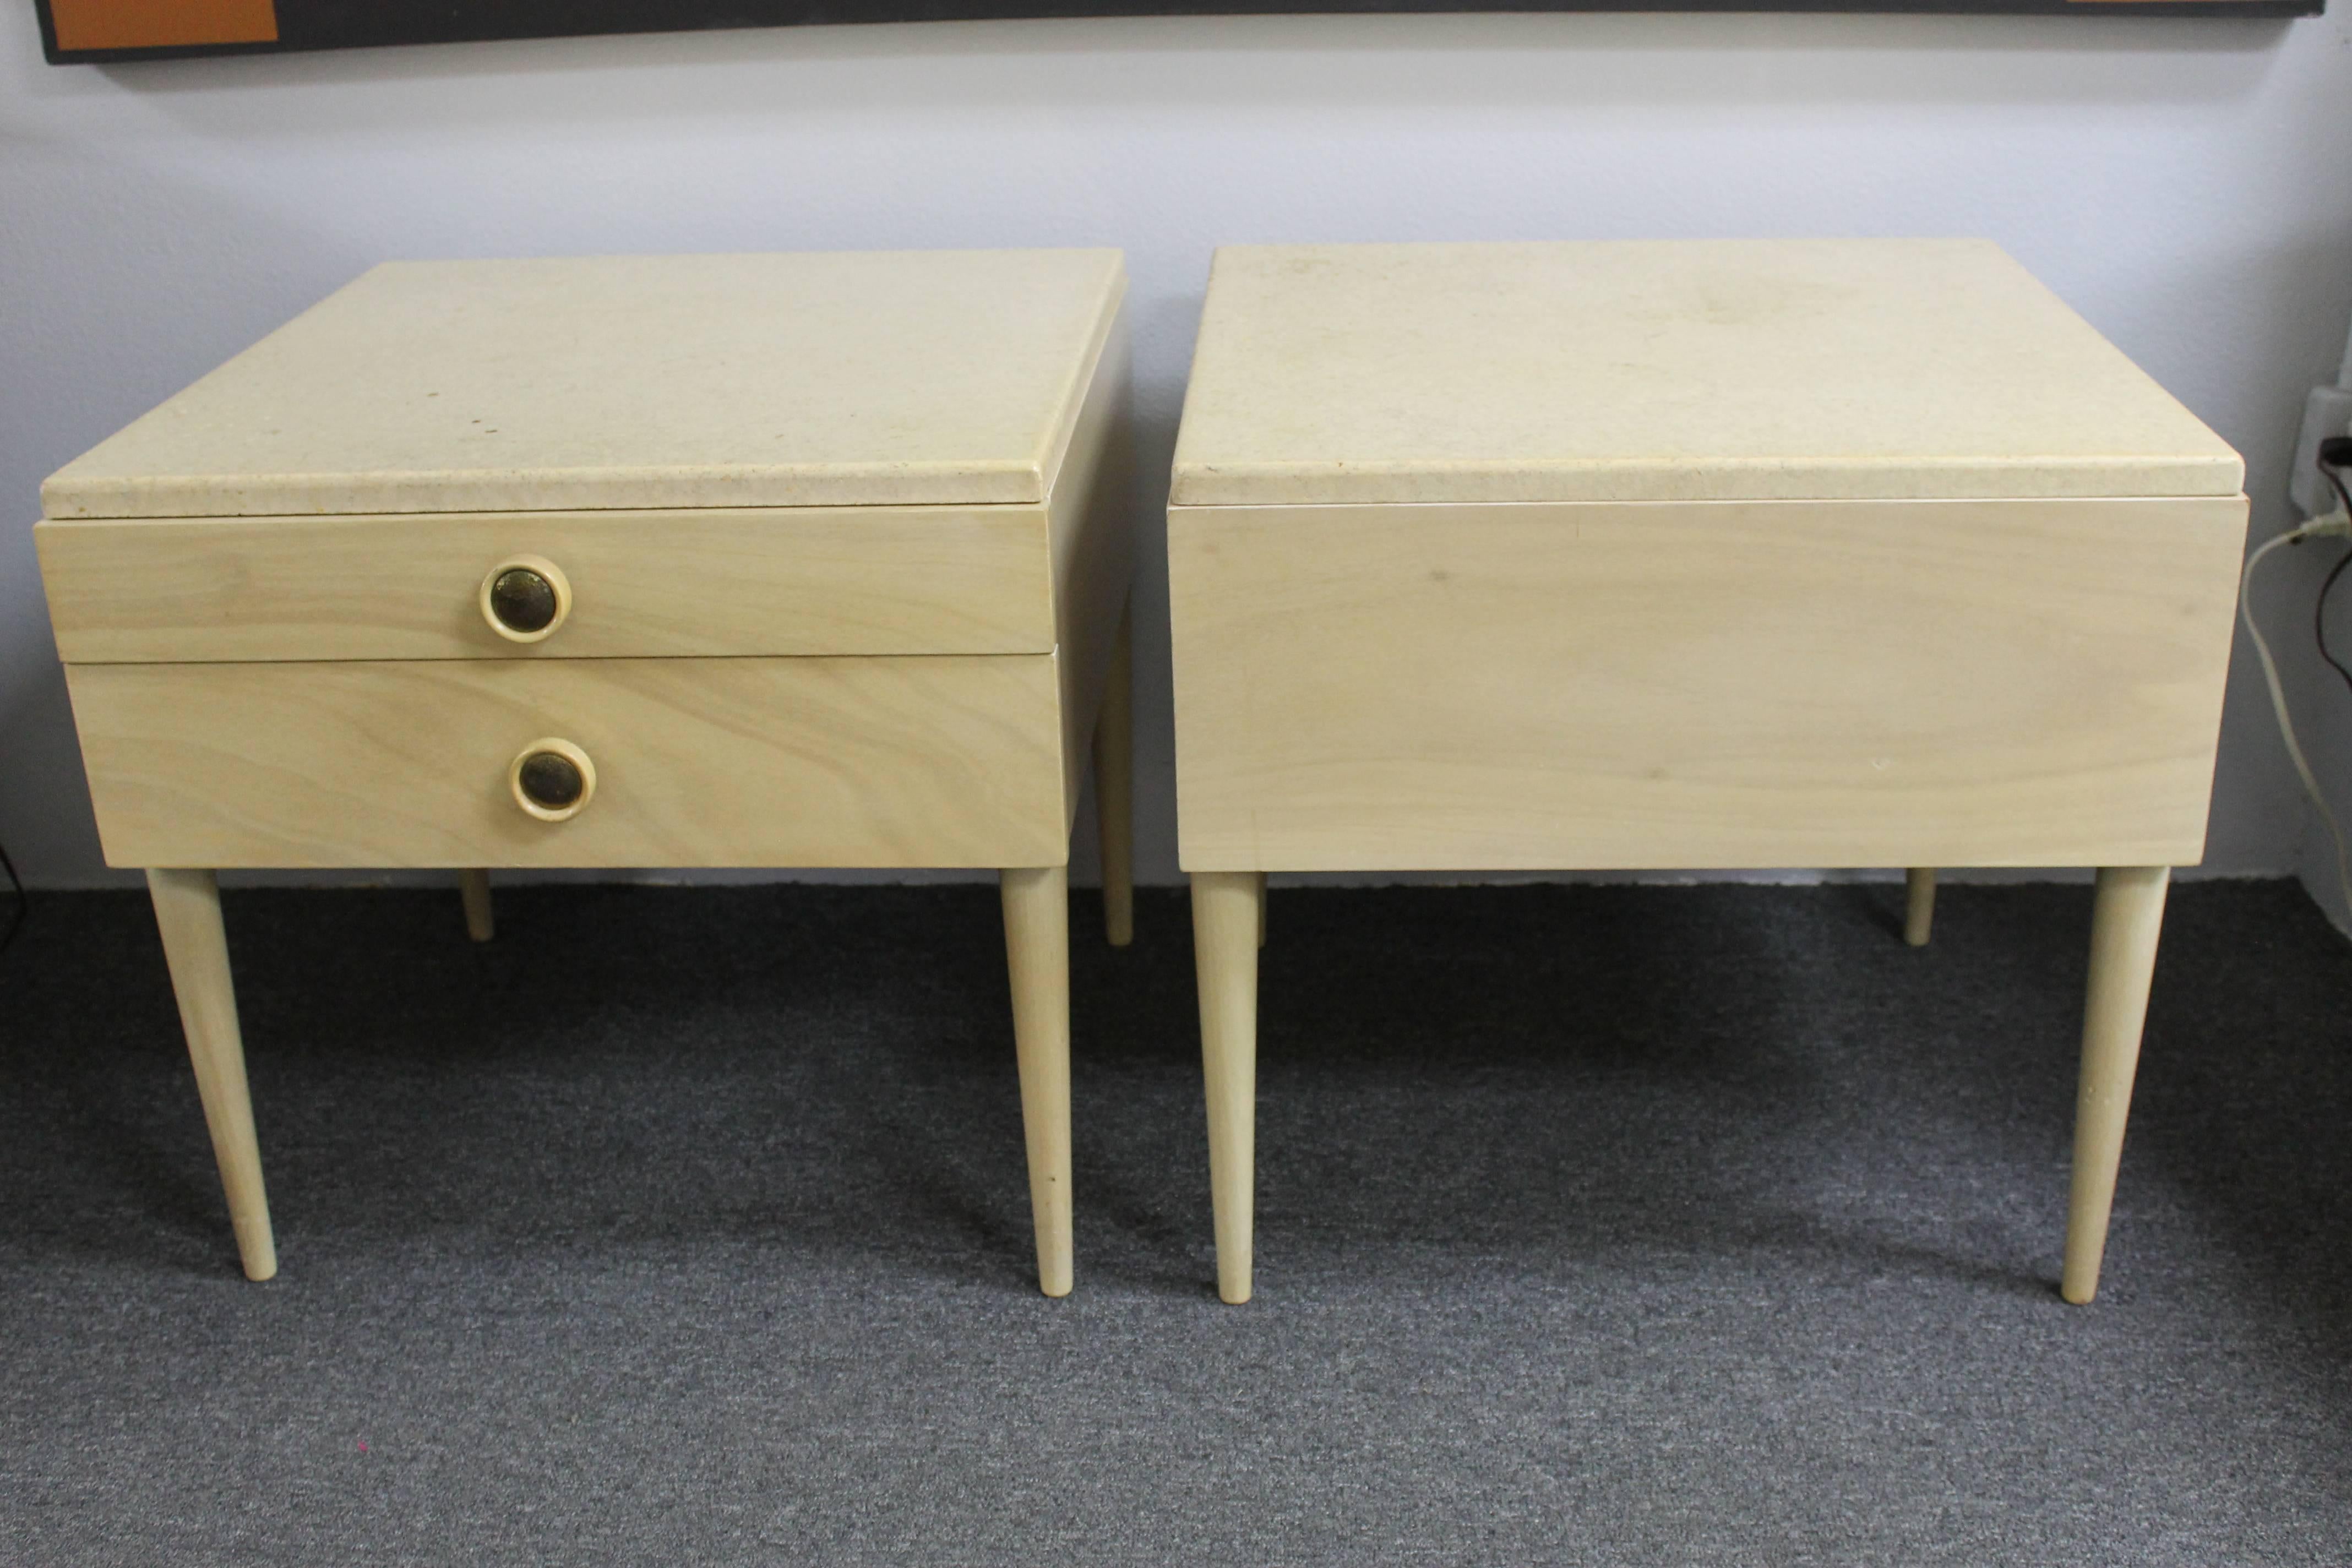 Pair of bedside end tables by Paul Frankl for Johnson Furniture Company, Grand Rapids, Michigan. These are all original including the cork tops. If you'd like we can have the tops redone, meaning lightly sanded and painted to match as close as